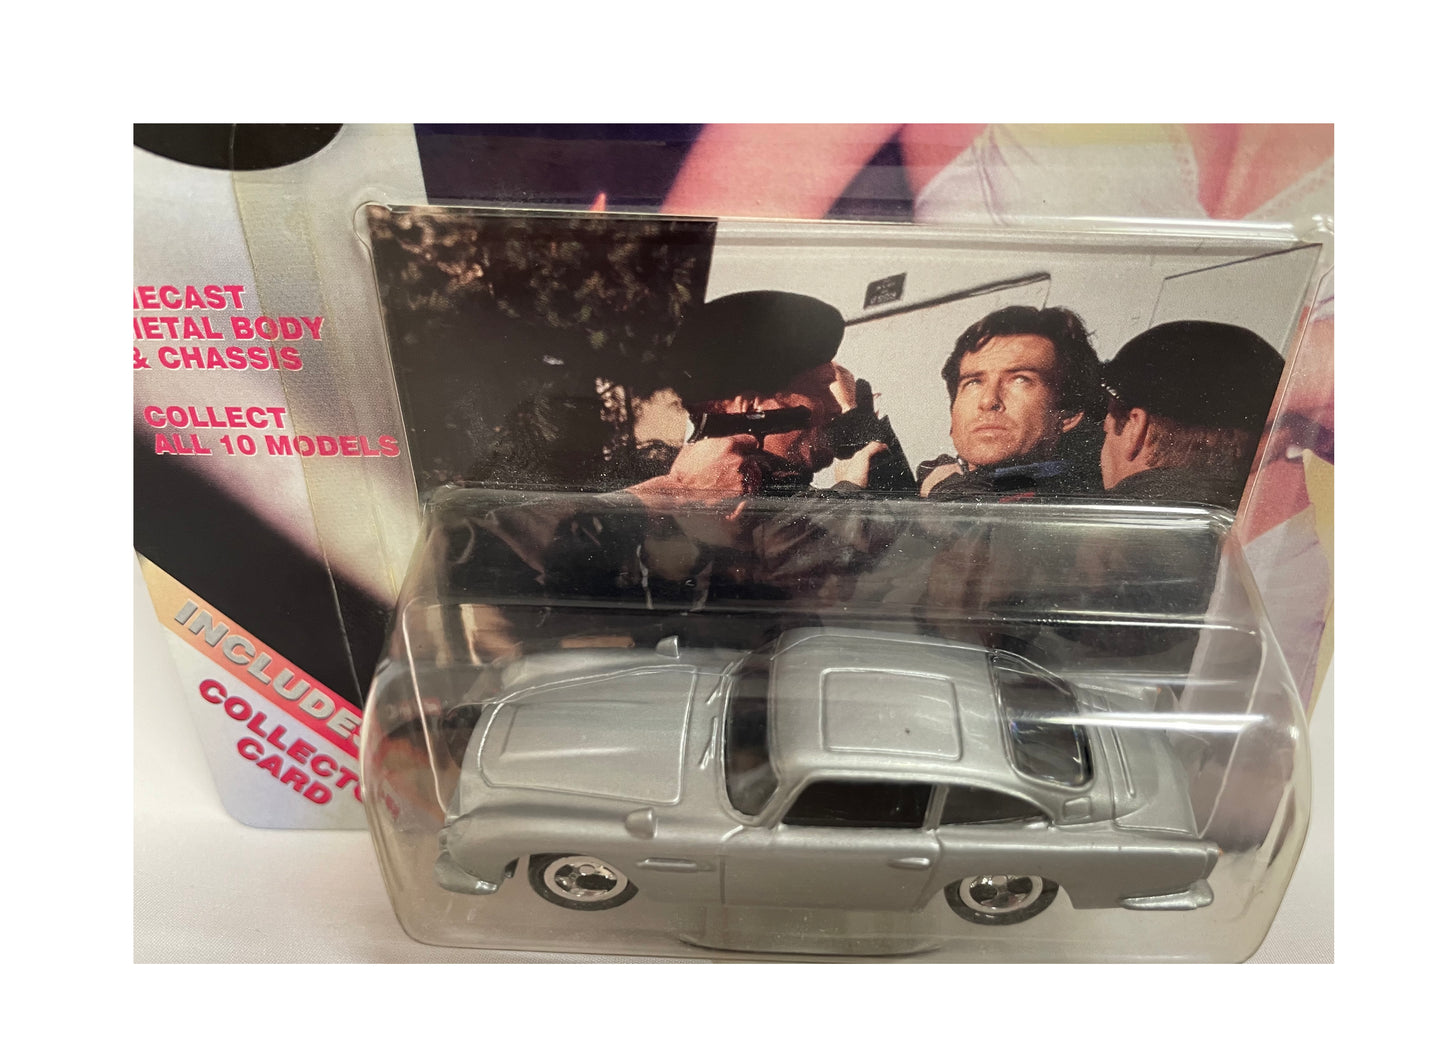 Vintage 1999 Corgi James Bond 007 - Goldeneye - Aston Martin DB5 1:65 Scale Die-Cast Vehicle Replica Number 99261 - Includes Free Collectors Card - Brand New Factory Sealed Shop Stock Room Find